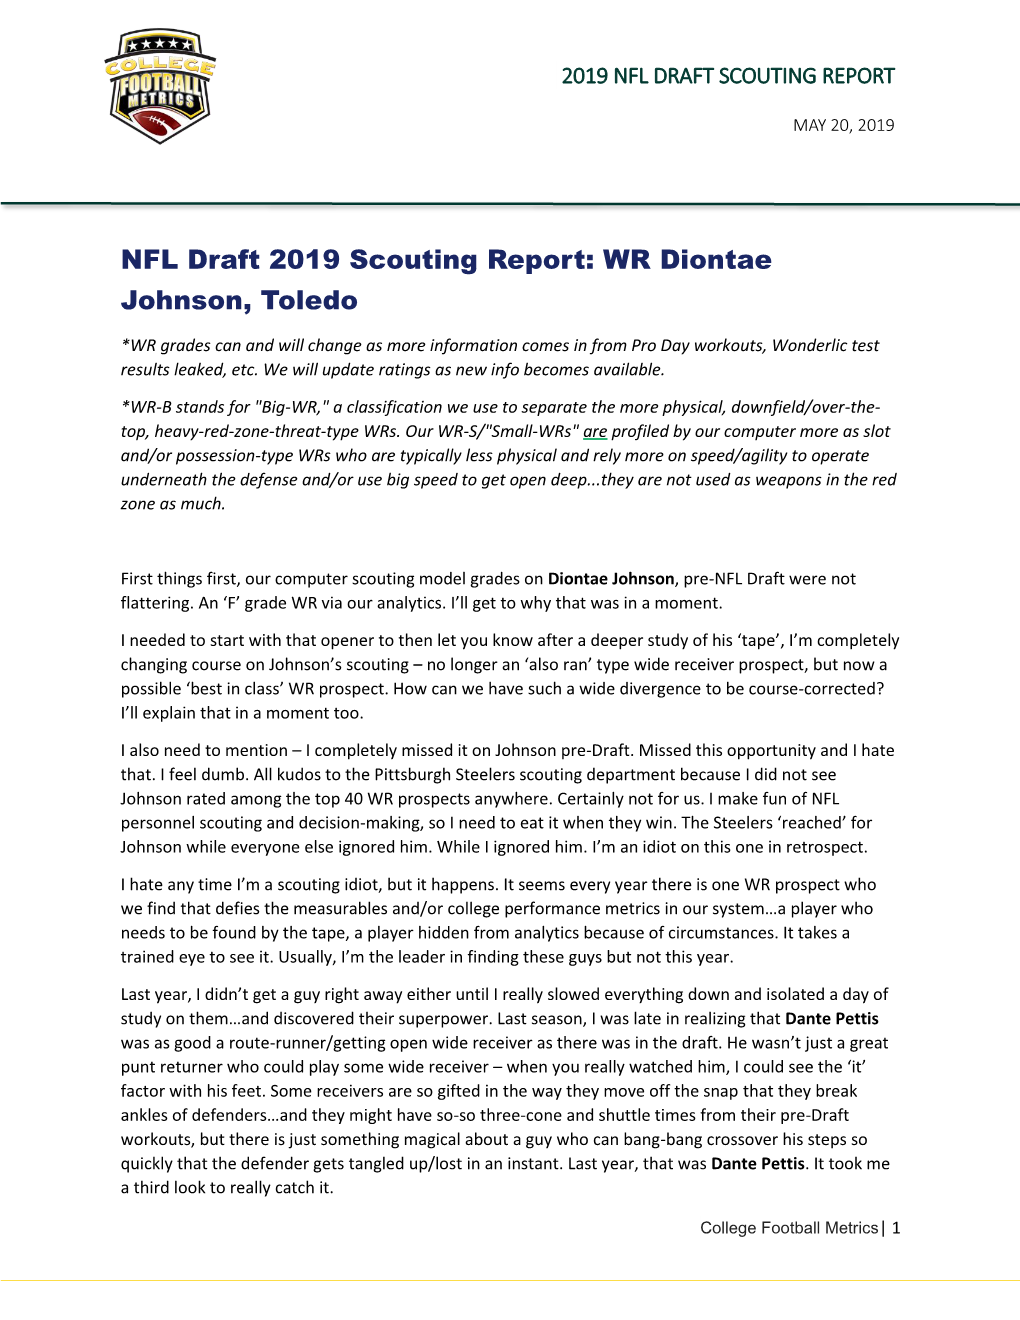 NFL Draft 2019 Scouting Report: WR Diontae Johnson, Toledo